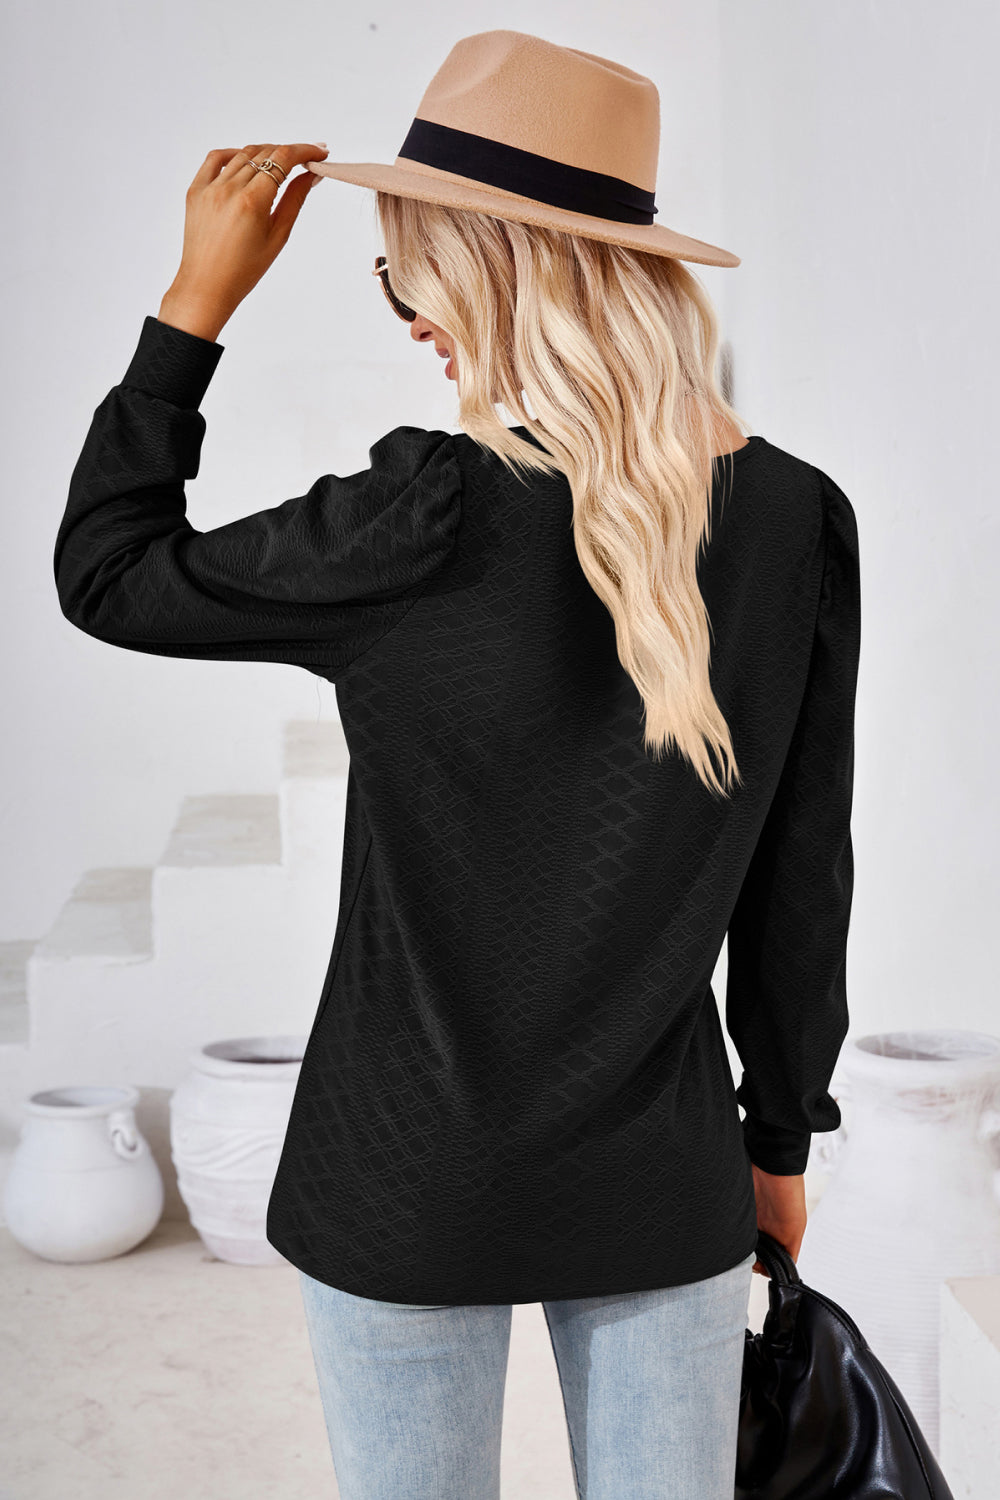 Square Neck Puff Sleeve Blouse - Women’s Clothing & Accessories - Shirts & Tops - 14 - 2024